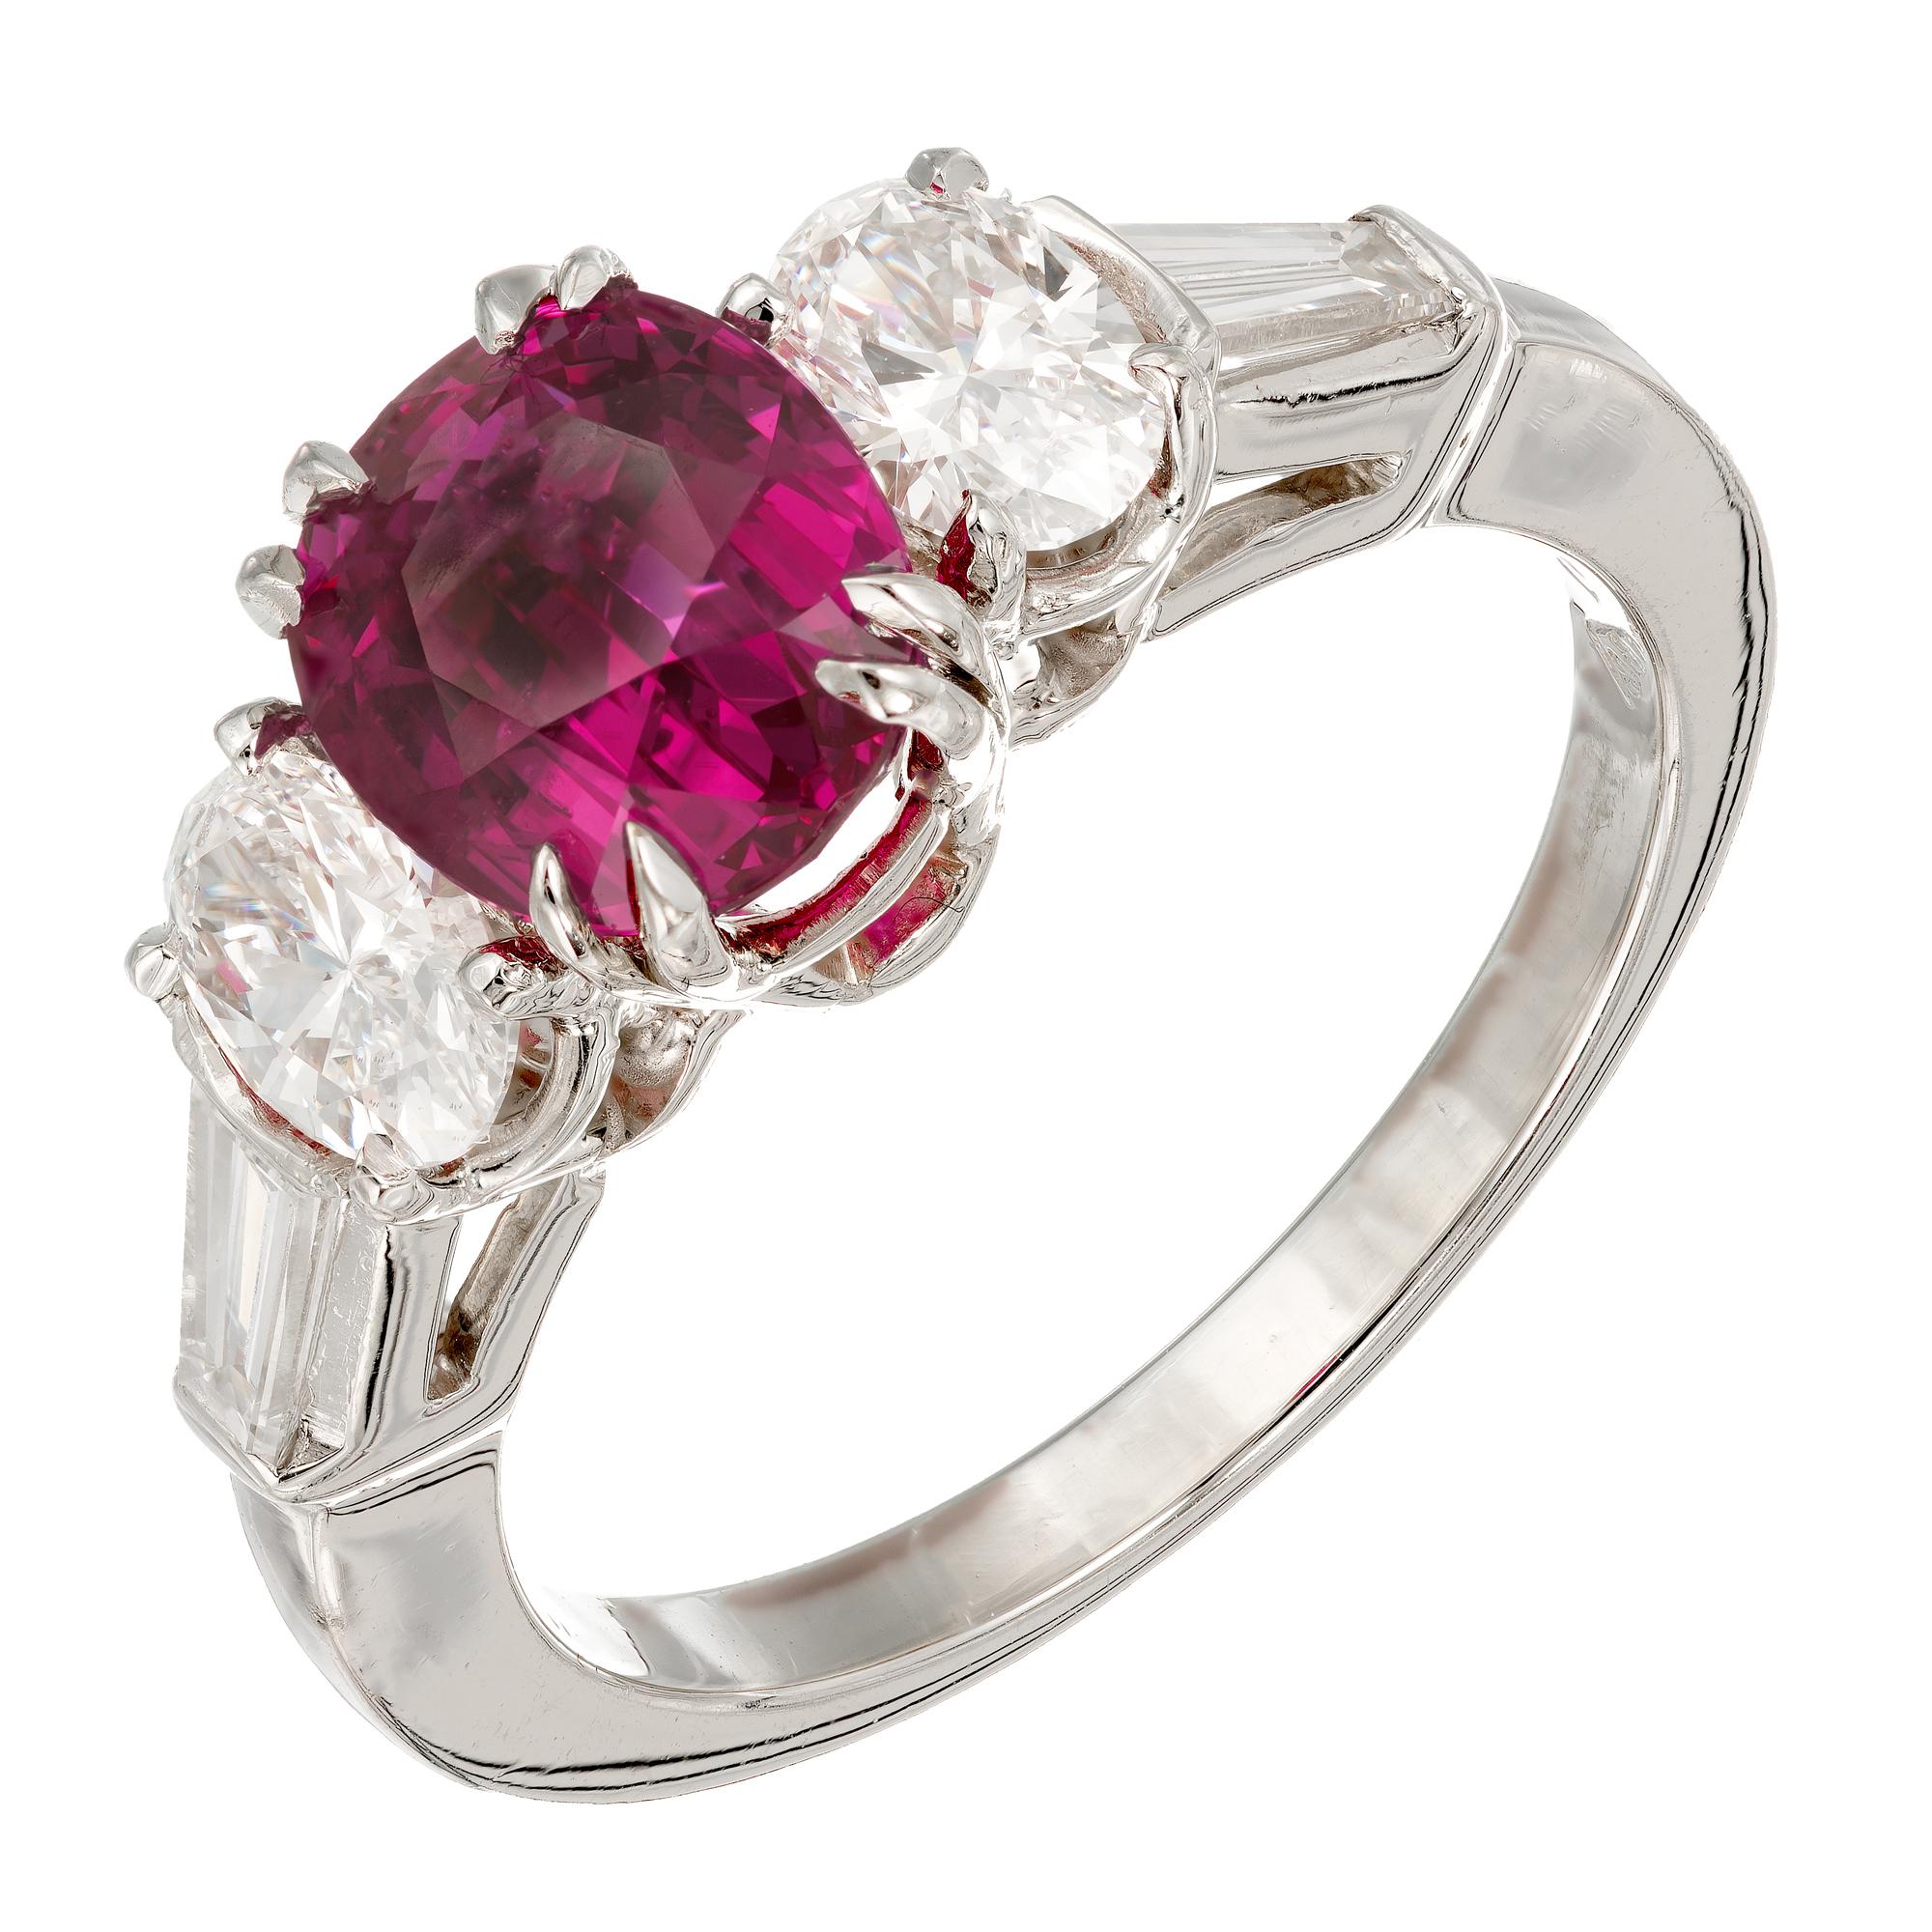 Peter Suchy Ruby and diamond engagement ring. GIA certified Burma Myanmar Ruby.  Bright vivid red center simple low level heat only ruby with four round and baguette side diamonds in a handmade Platinum setting. 

1 oval brilliant cut gem purplish